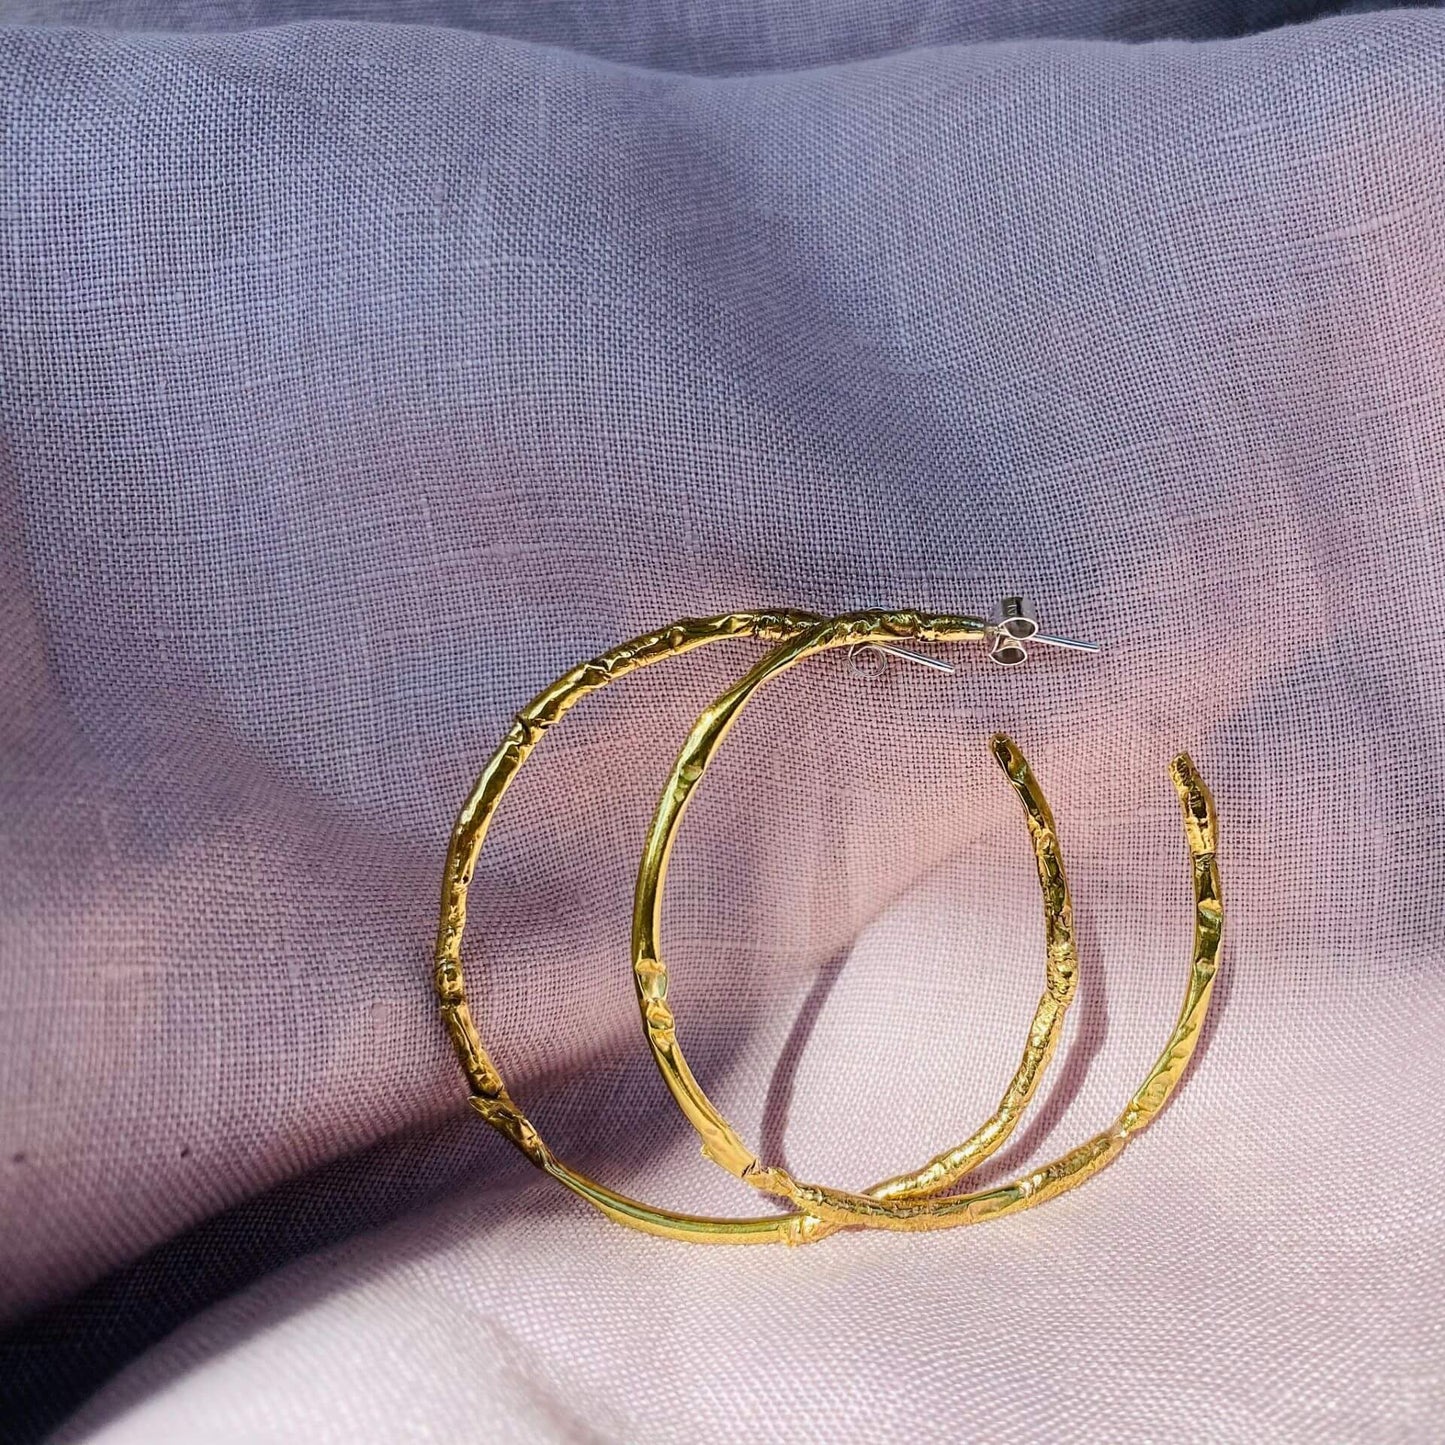 Lucy Lane Jewellery Earrings Large Goddess Hoops - Recycled Brass